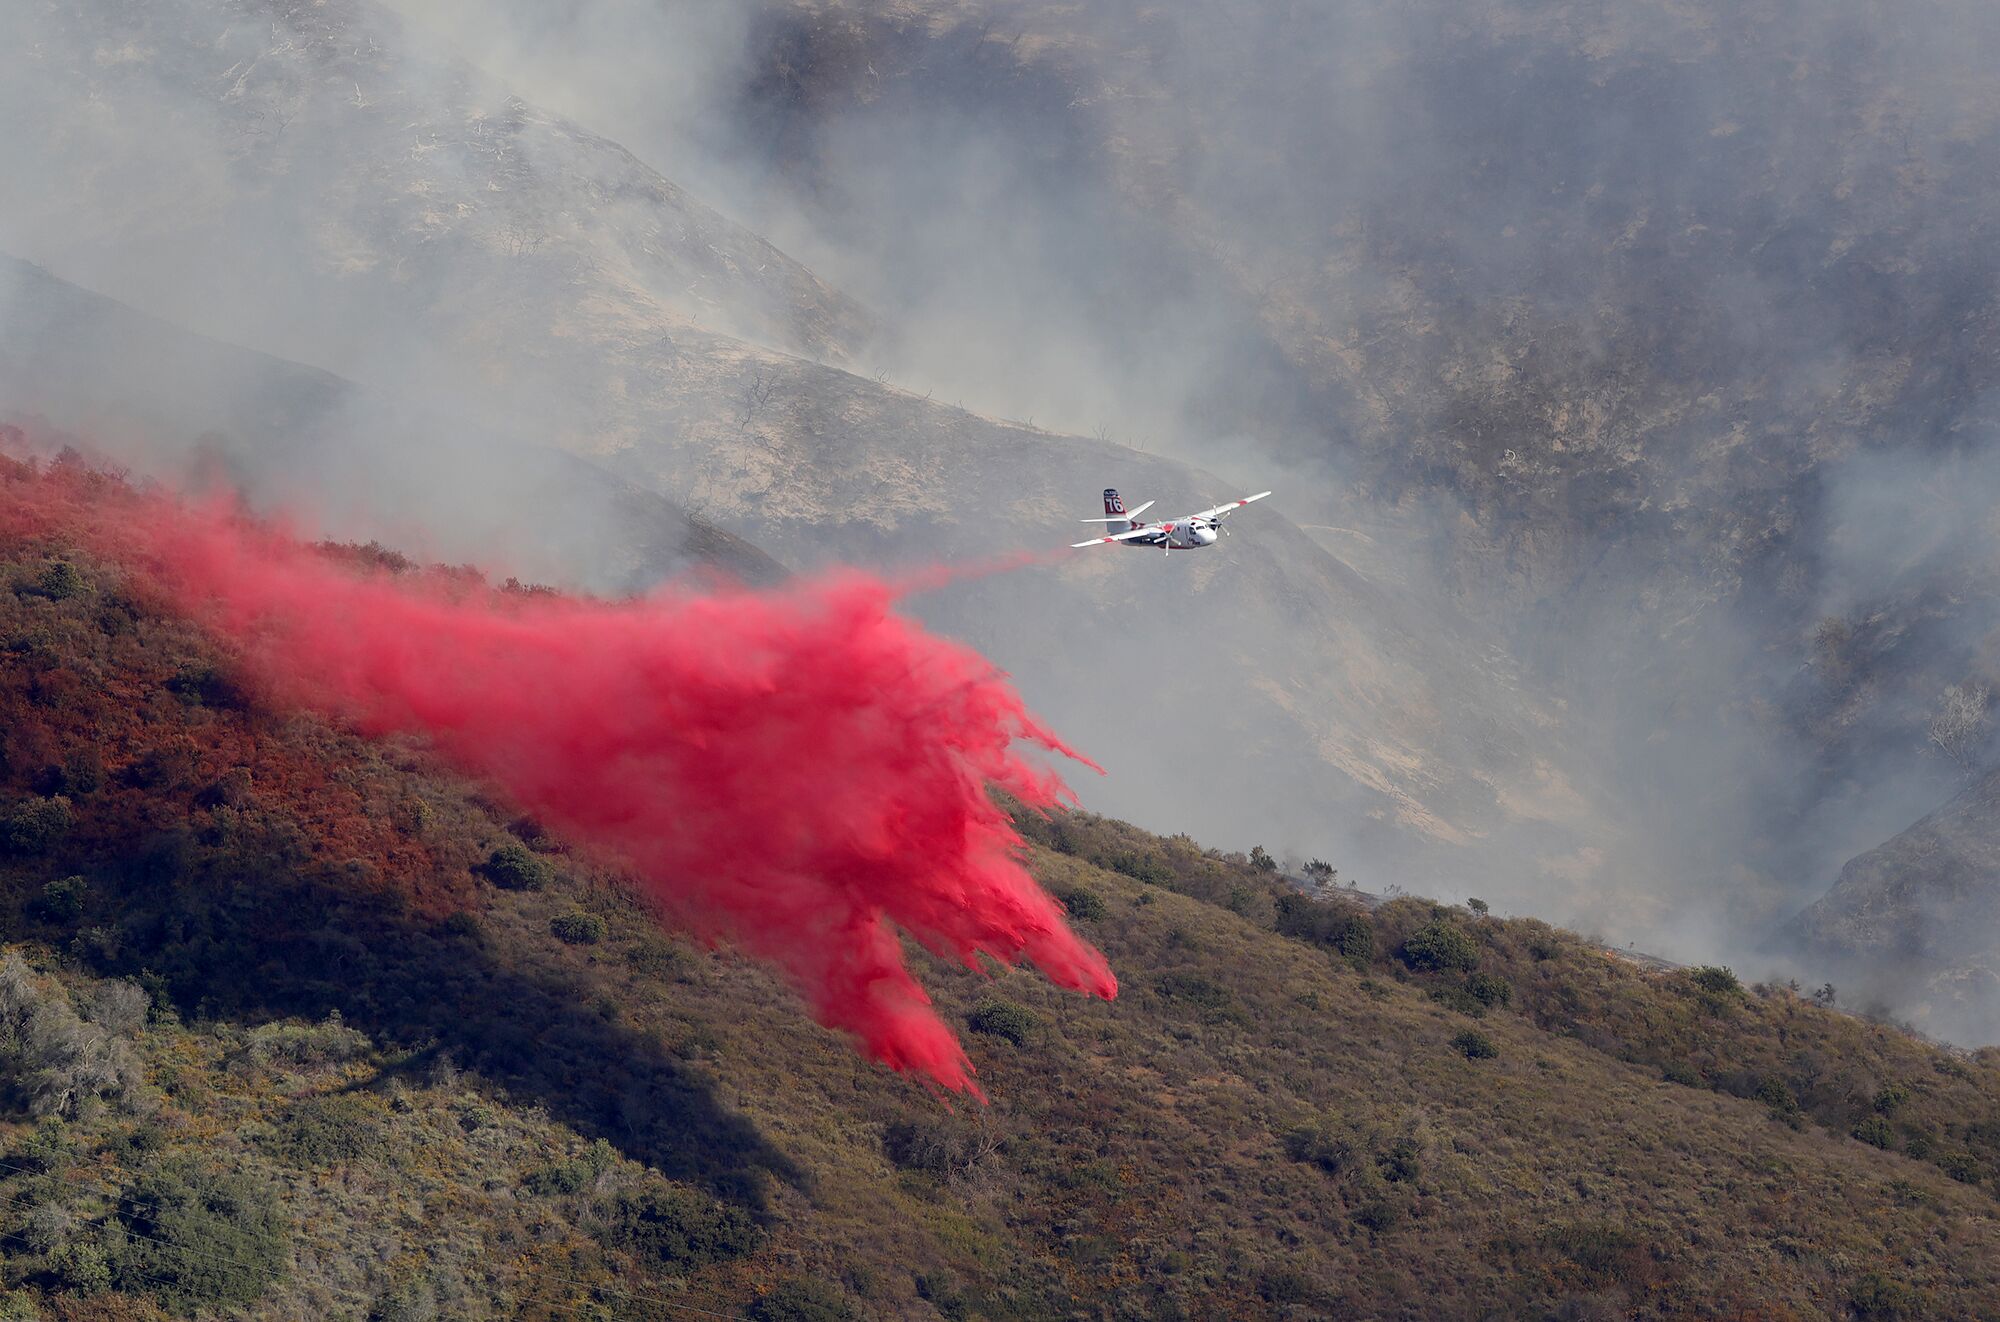 Bright red fire retardant dropped by an airplane above a smoky hillside